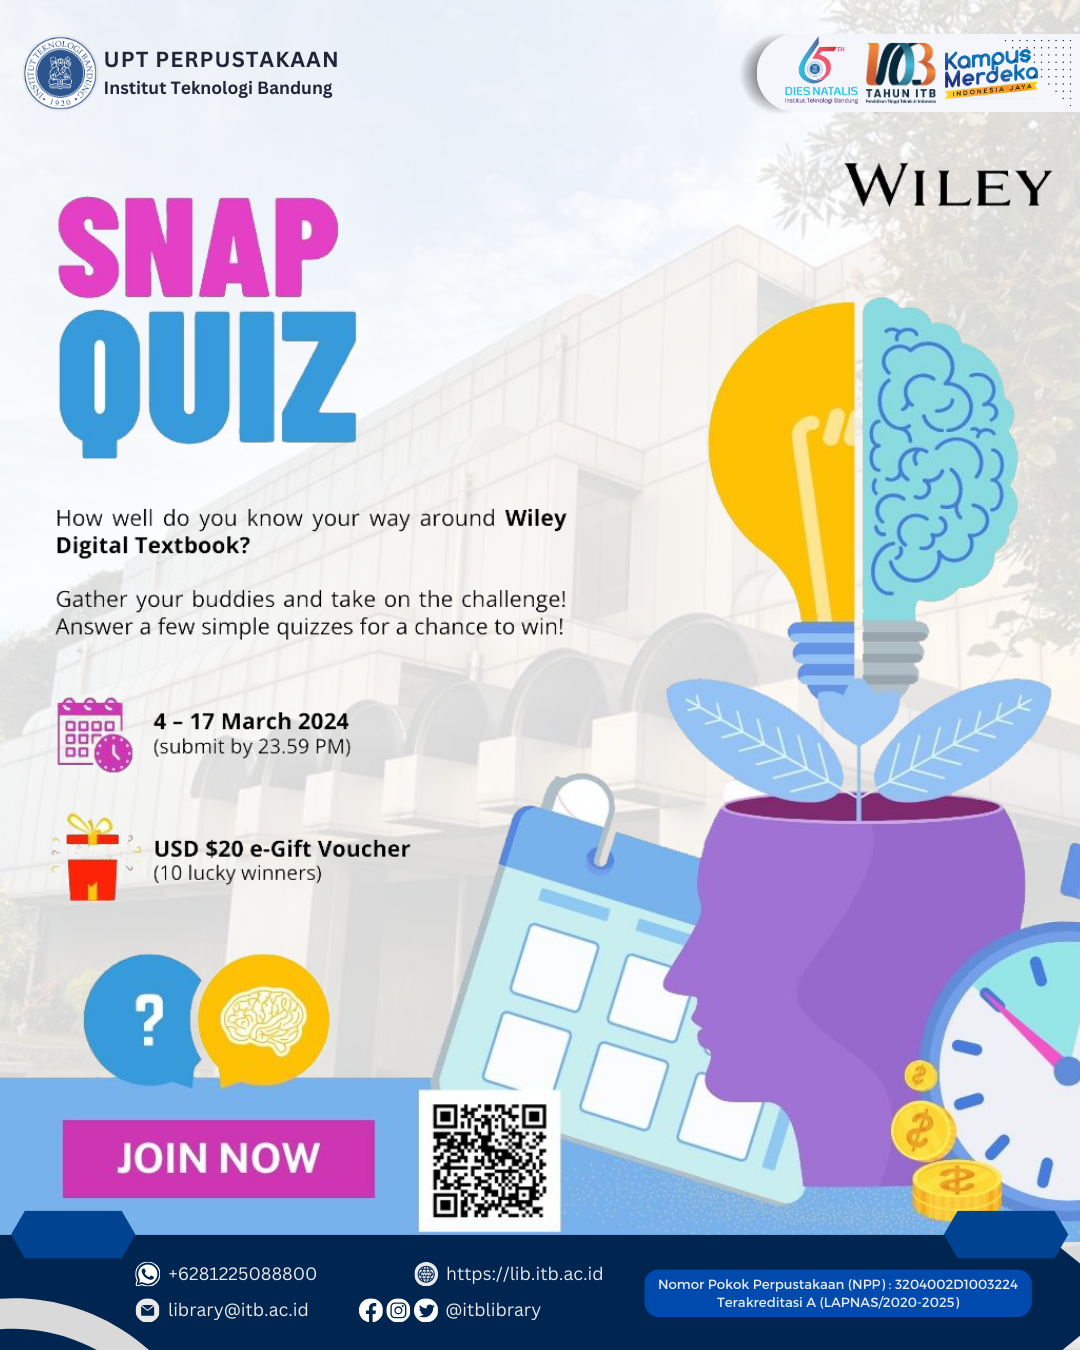 Wiley Fun and Learn Campaign 2024